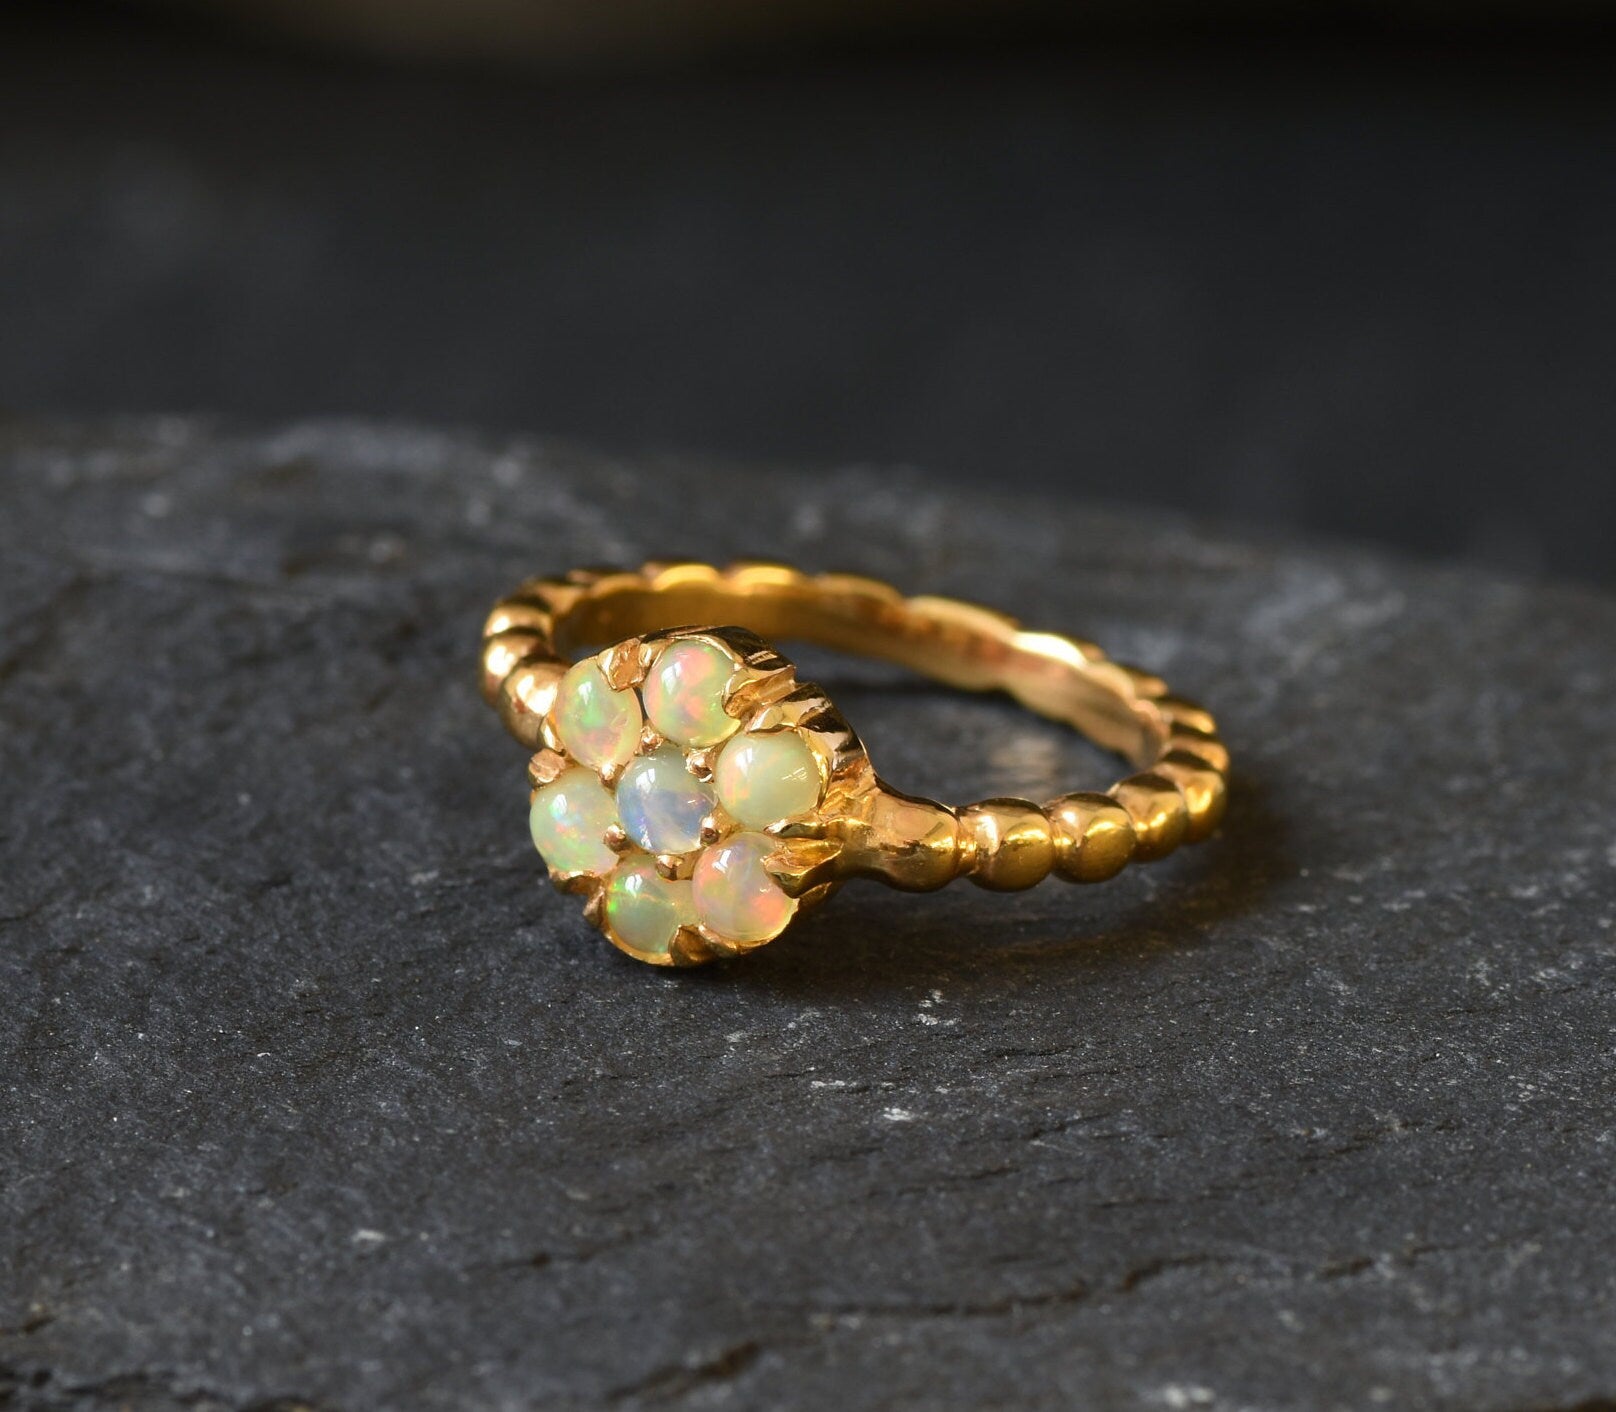 Gold Flower Ring, Fire Opal Ring, Daisy Ring, Natural Opal, October Birthstone, Gold Plated Ring, Dainty Flower Ring, Vintage Ring, Vermeil